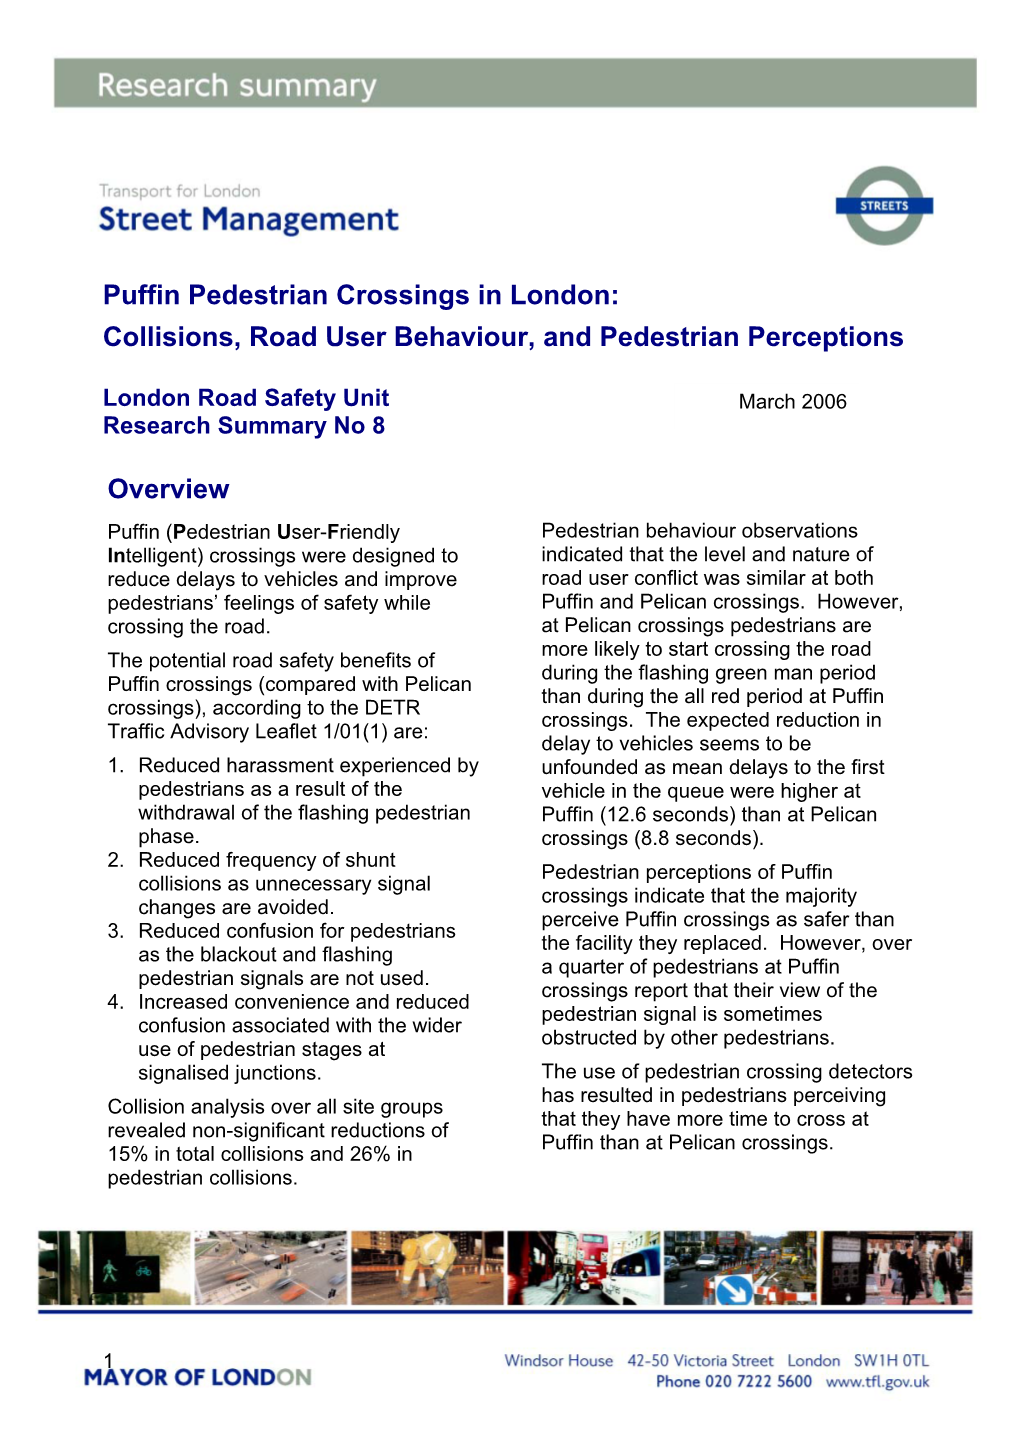 Puffin Pedestrian Crossings in London: Collisions, Road User Behaviour, and Pedestrian Perceptions